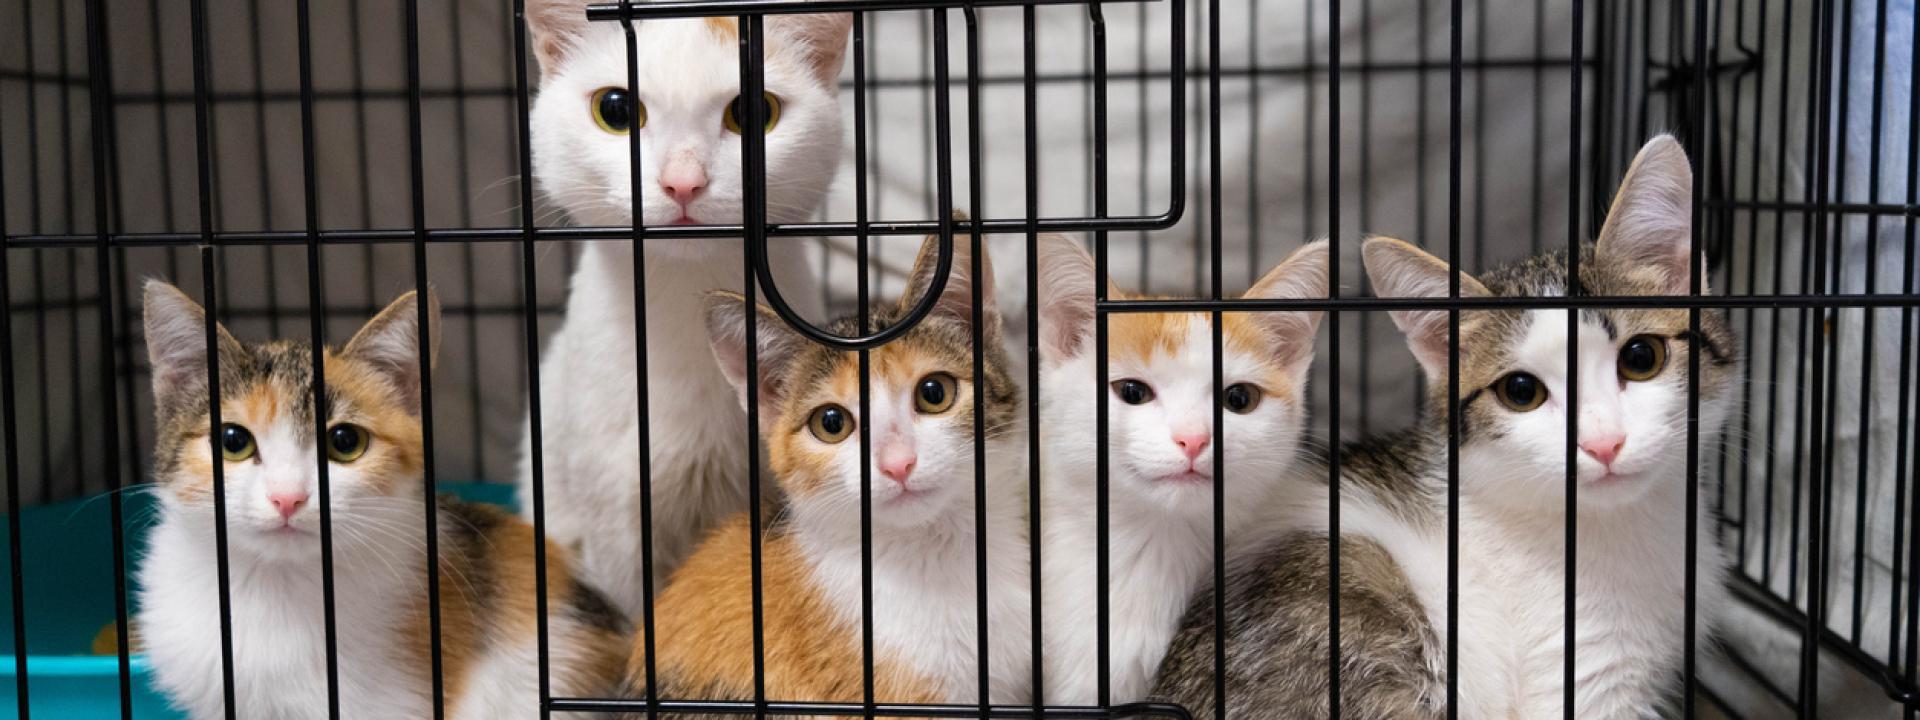 A group of kittens in a cage